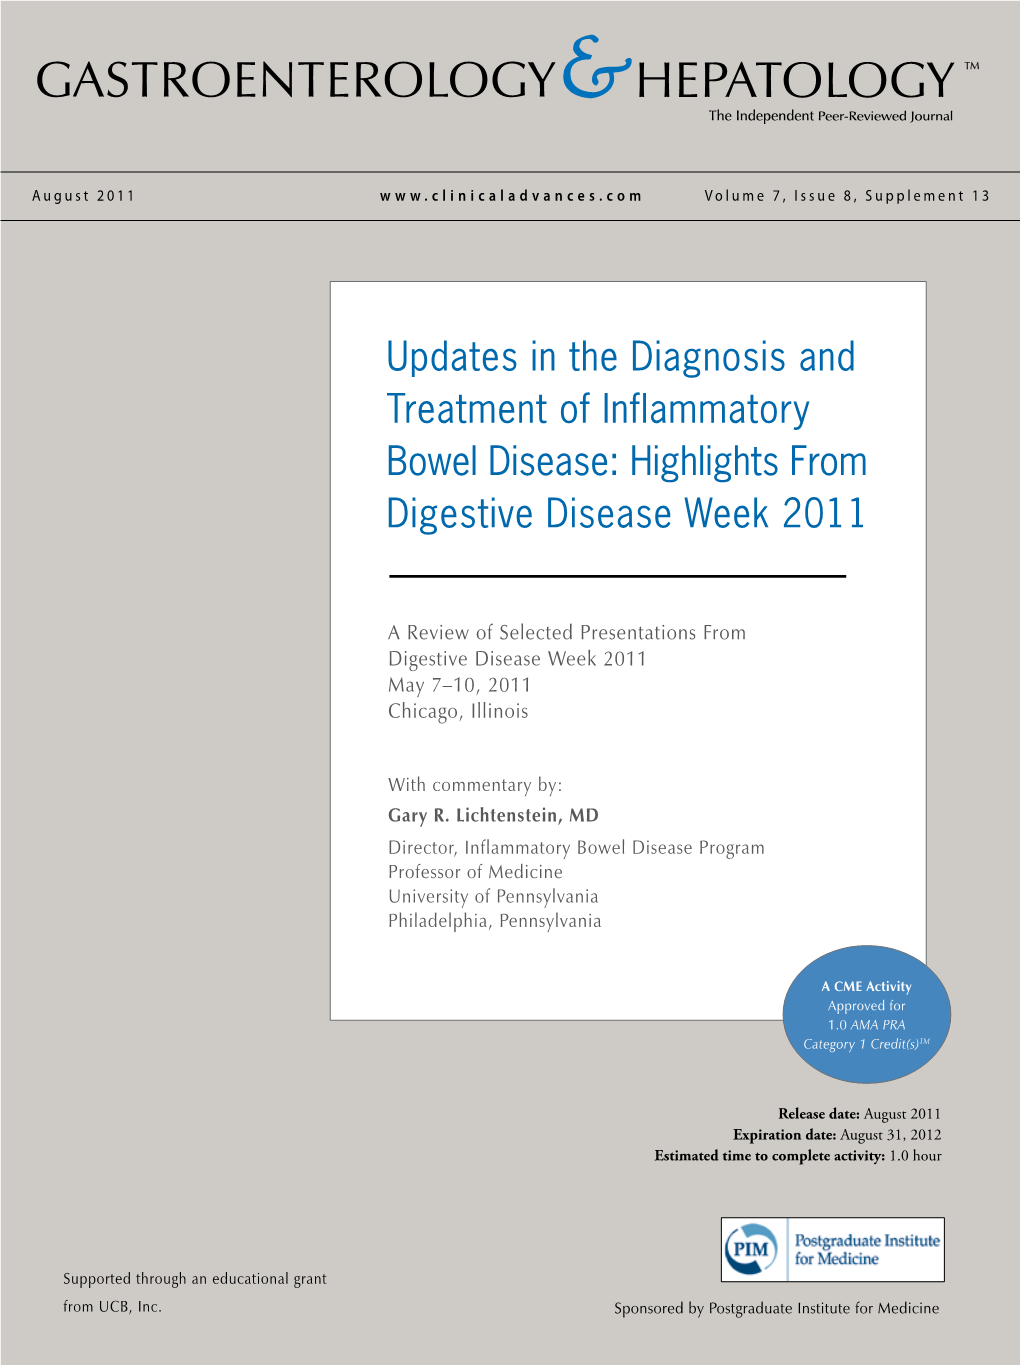 Updates in the Diagnosis and Treatment of Inflammatory Bowel Disease: Highlights from Digestive Disease Week 2011